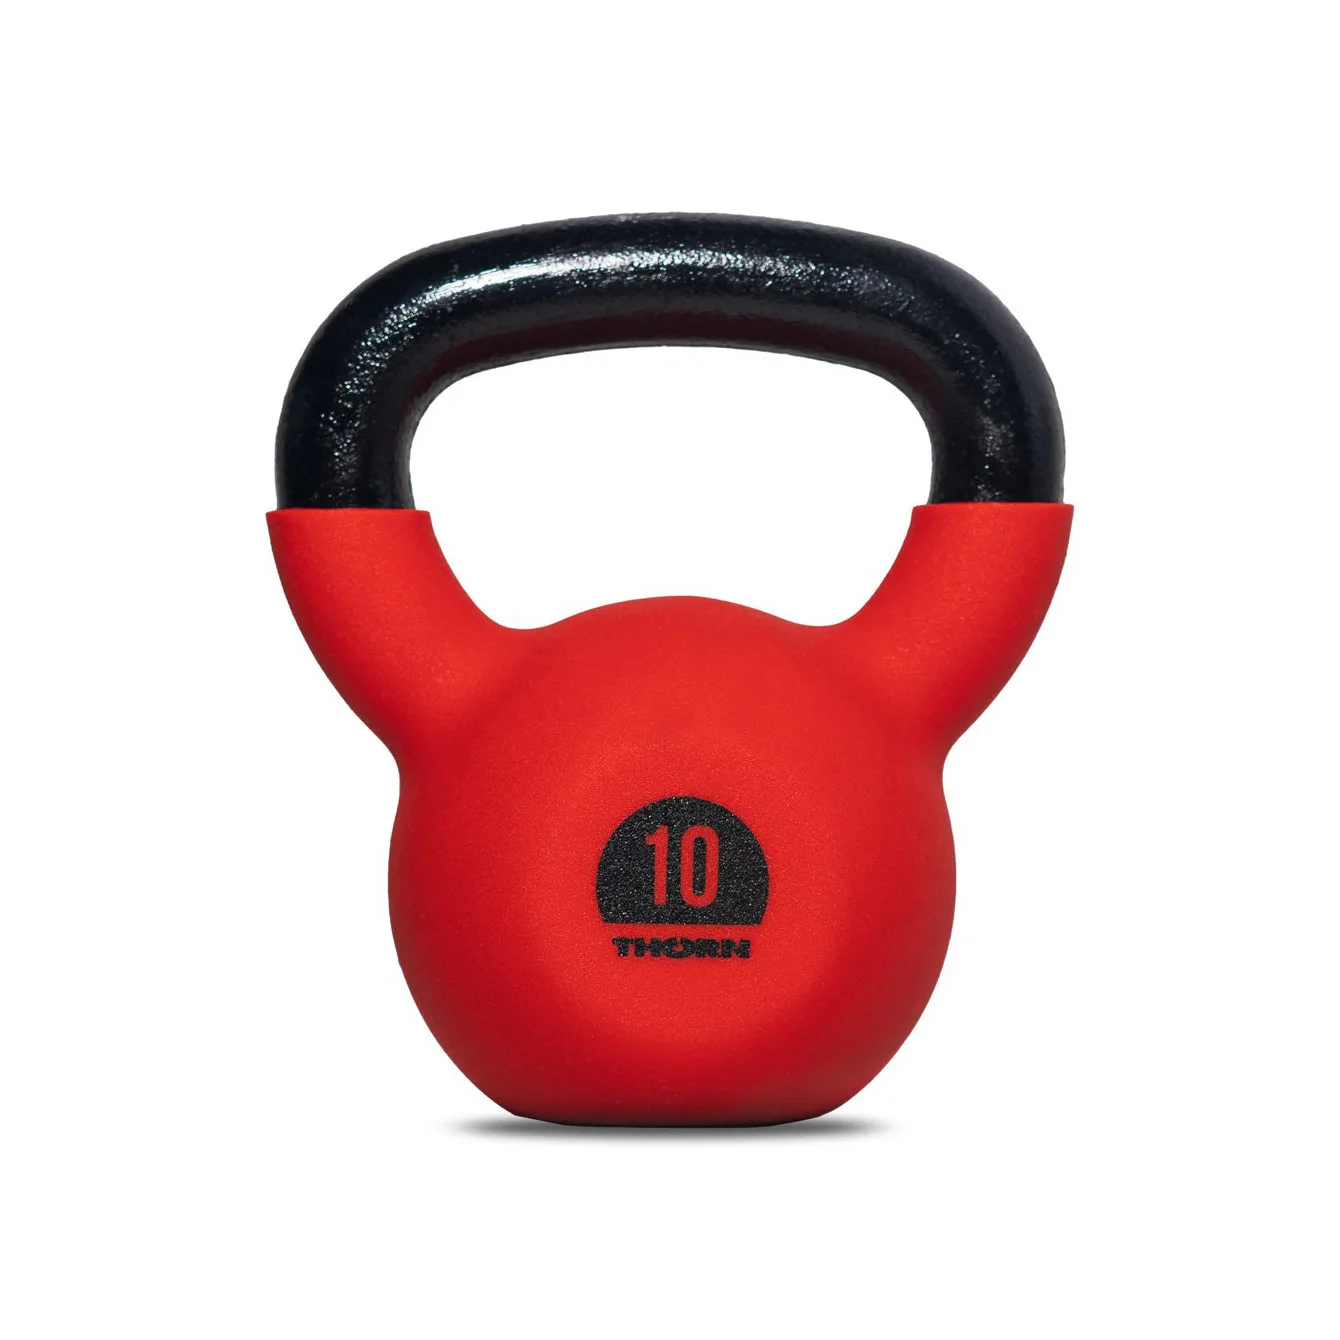 Cast-iron kettlebell with rubber protective coating 10 kg – Thorn Fit, Crossfit equipment